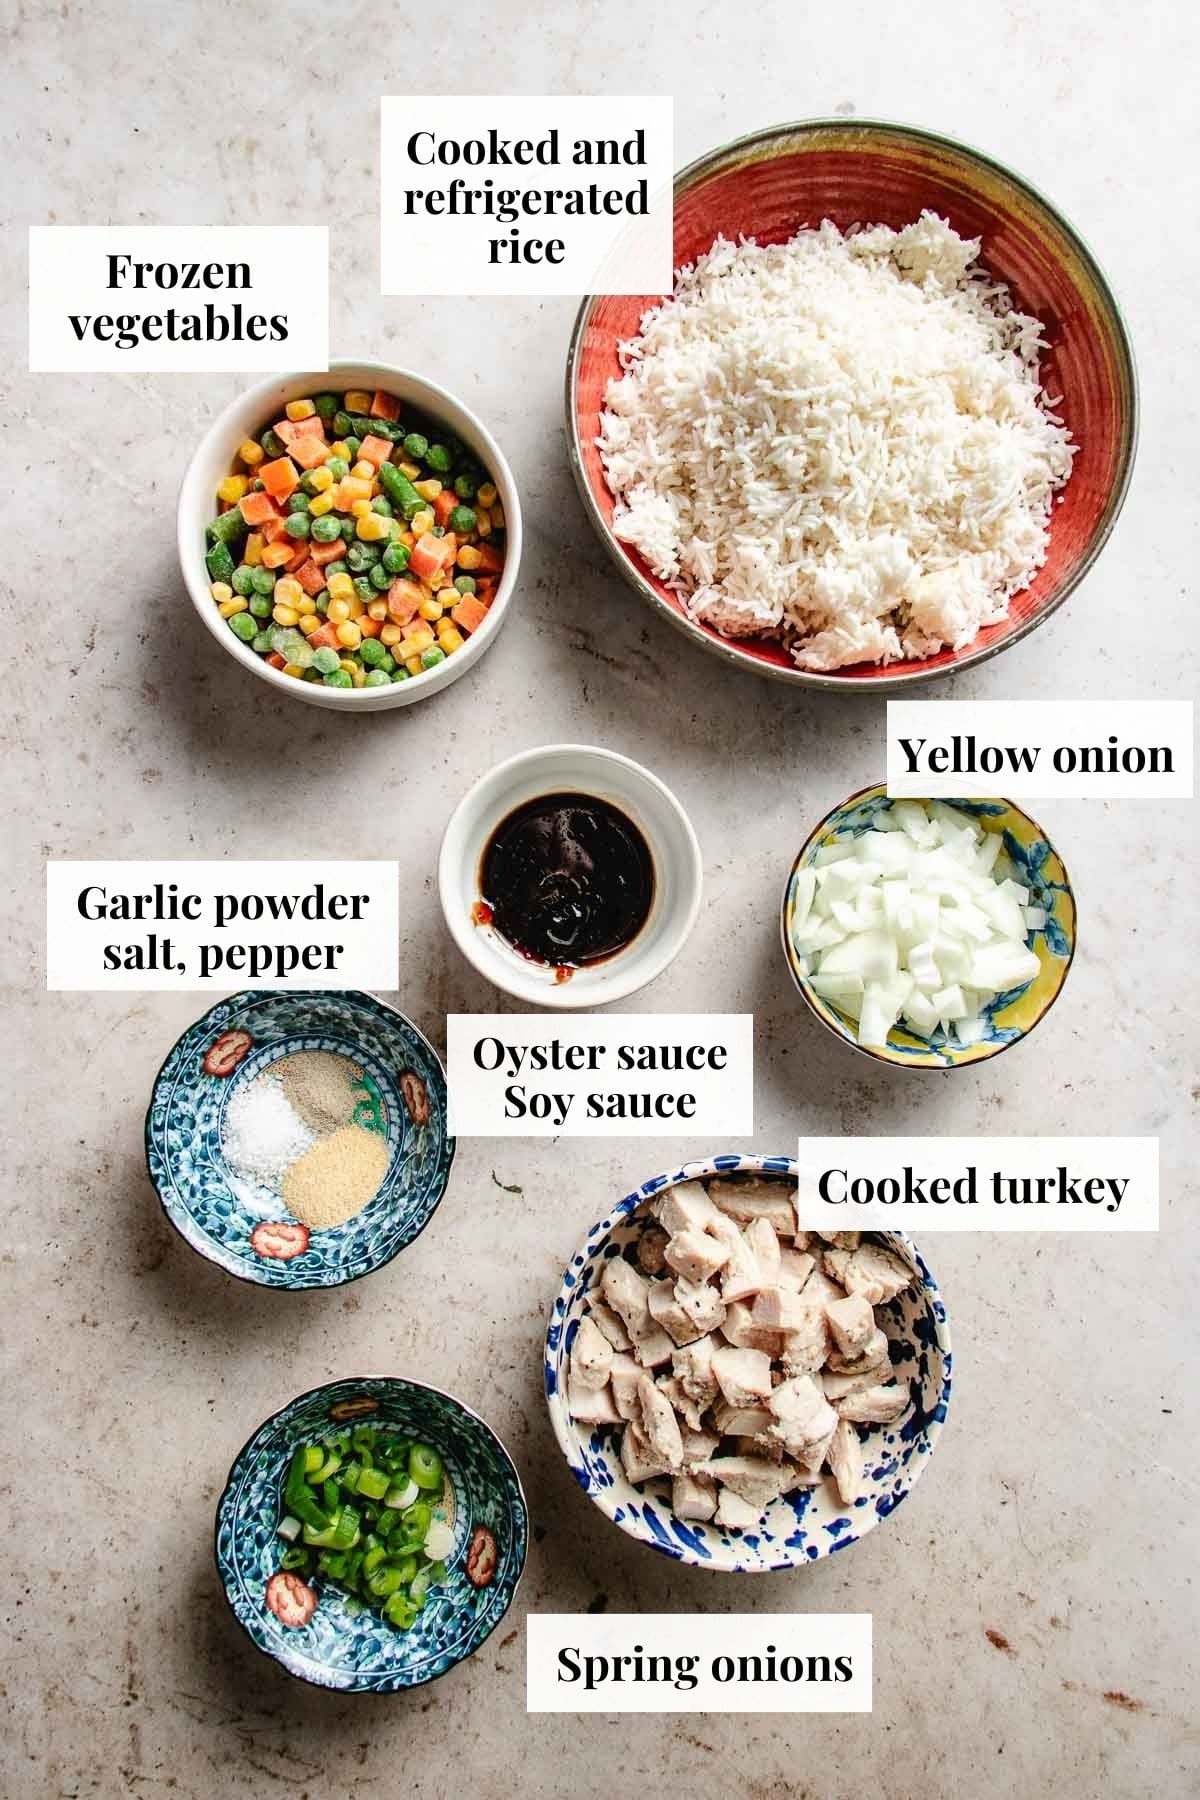 Ingredients used to make fried rice with leftover turkey.